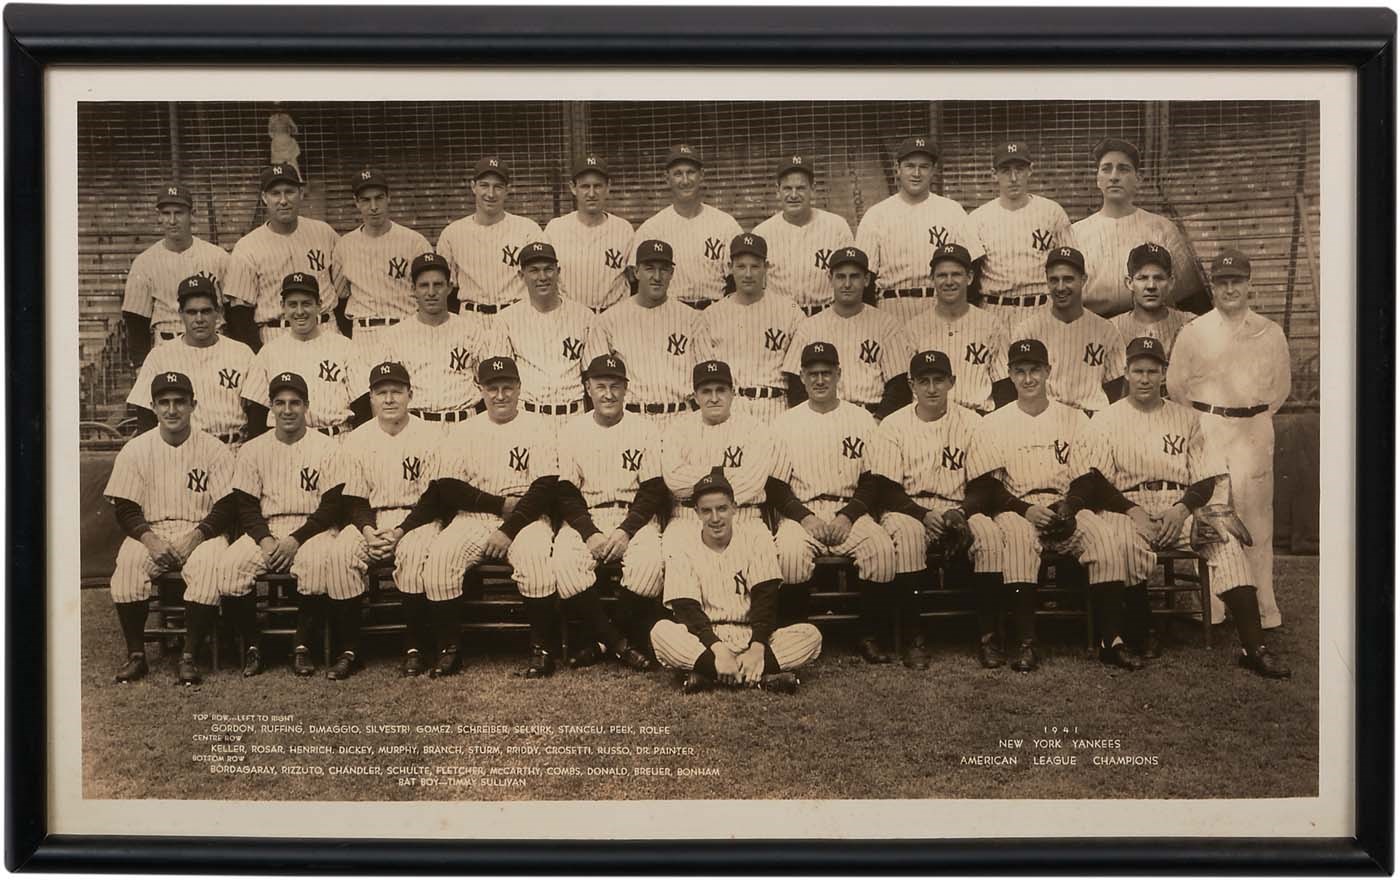 - 1937-50 NY Yankees Presentation Photos Given to Players and VIPs (5)